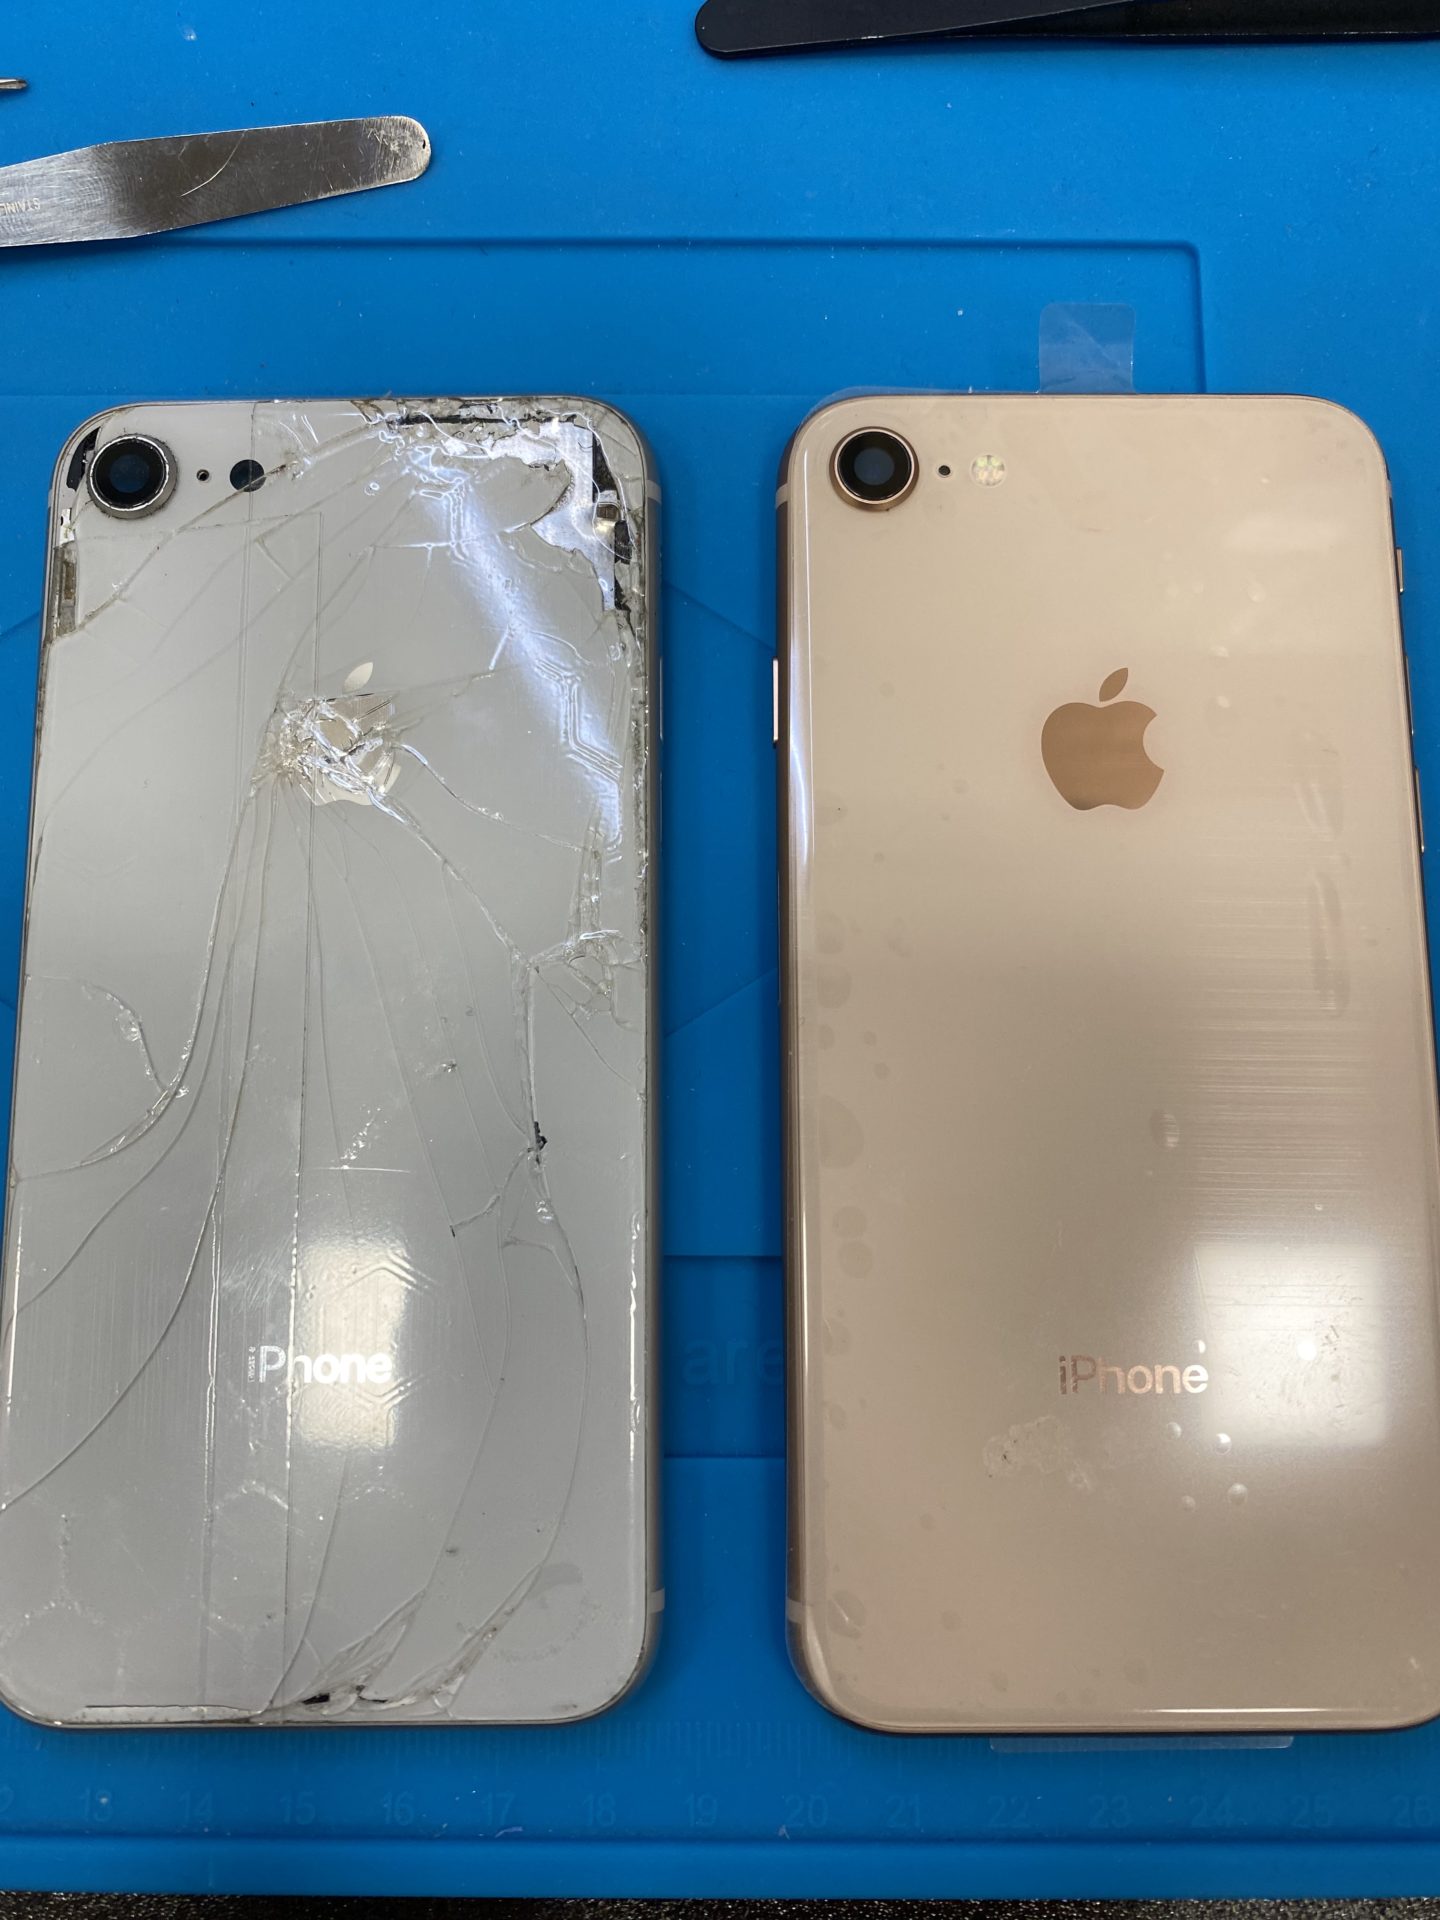 iPhone8の背面が割れたときはどうするのが正解？【千葉・八千代・佐倉 